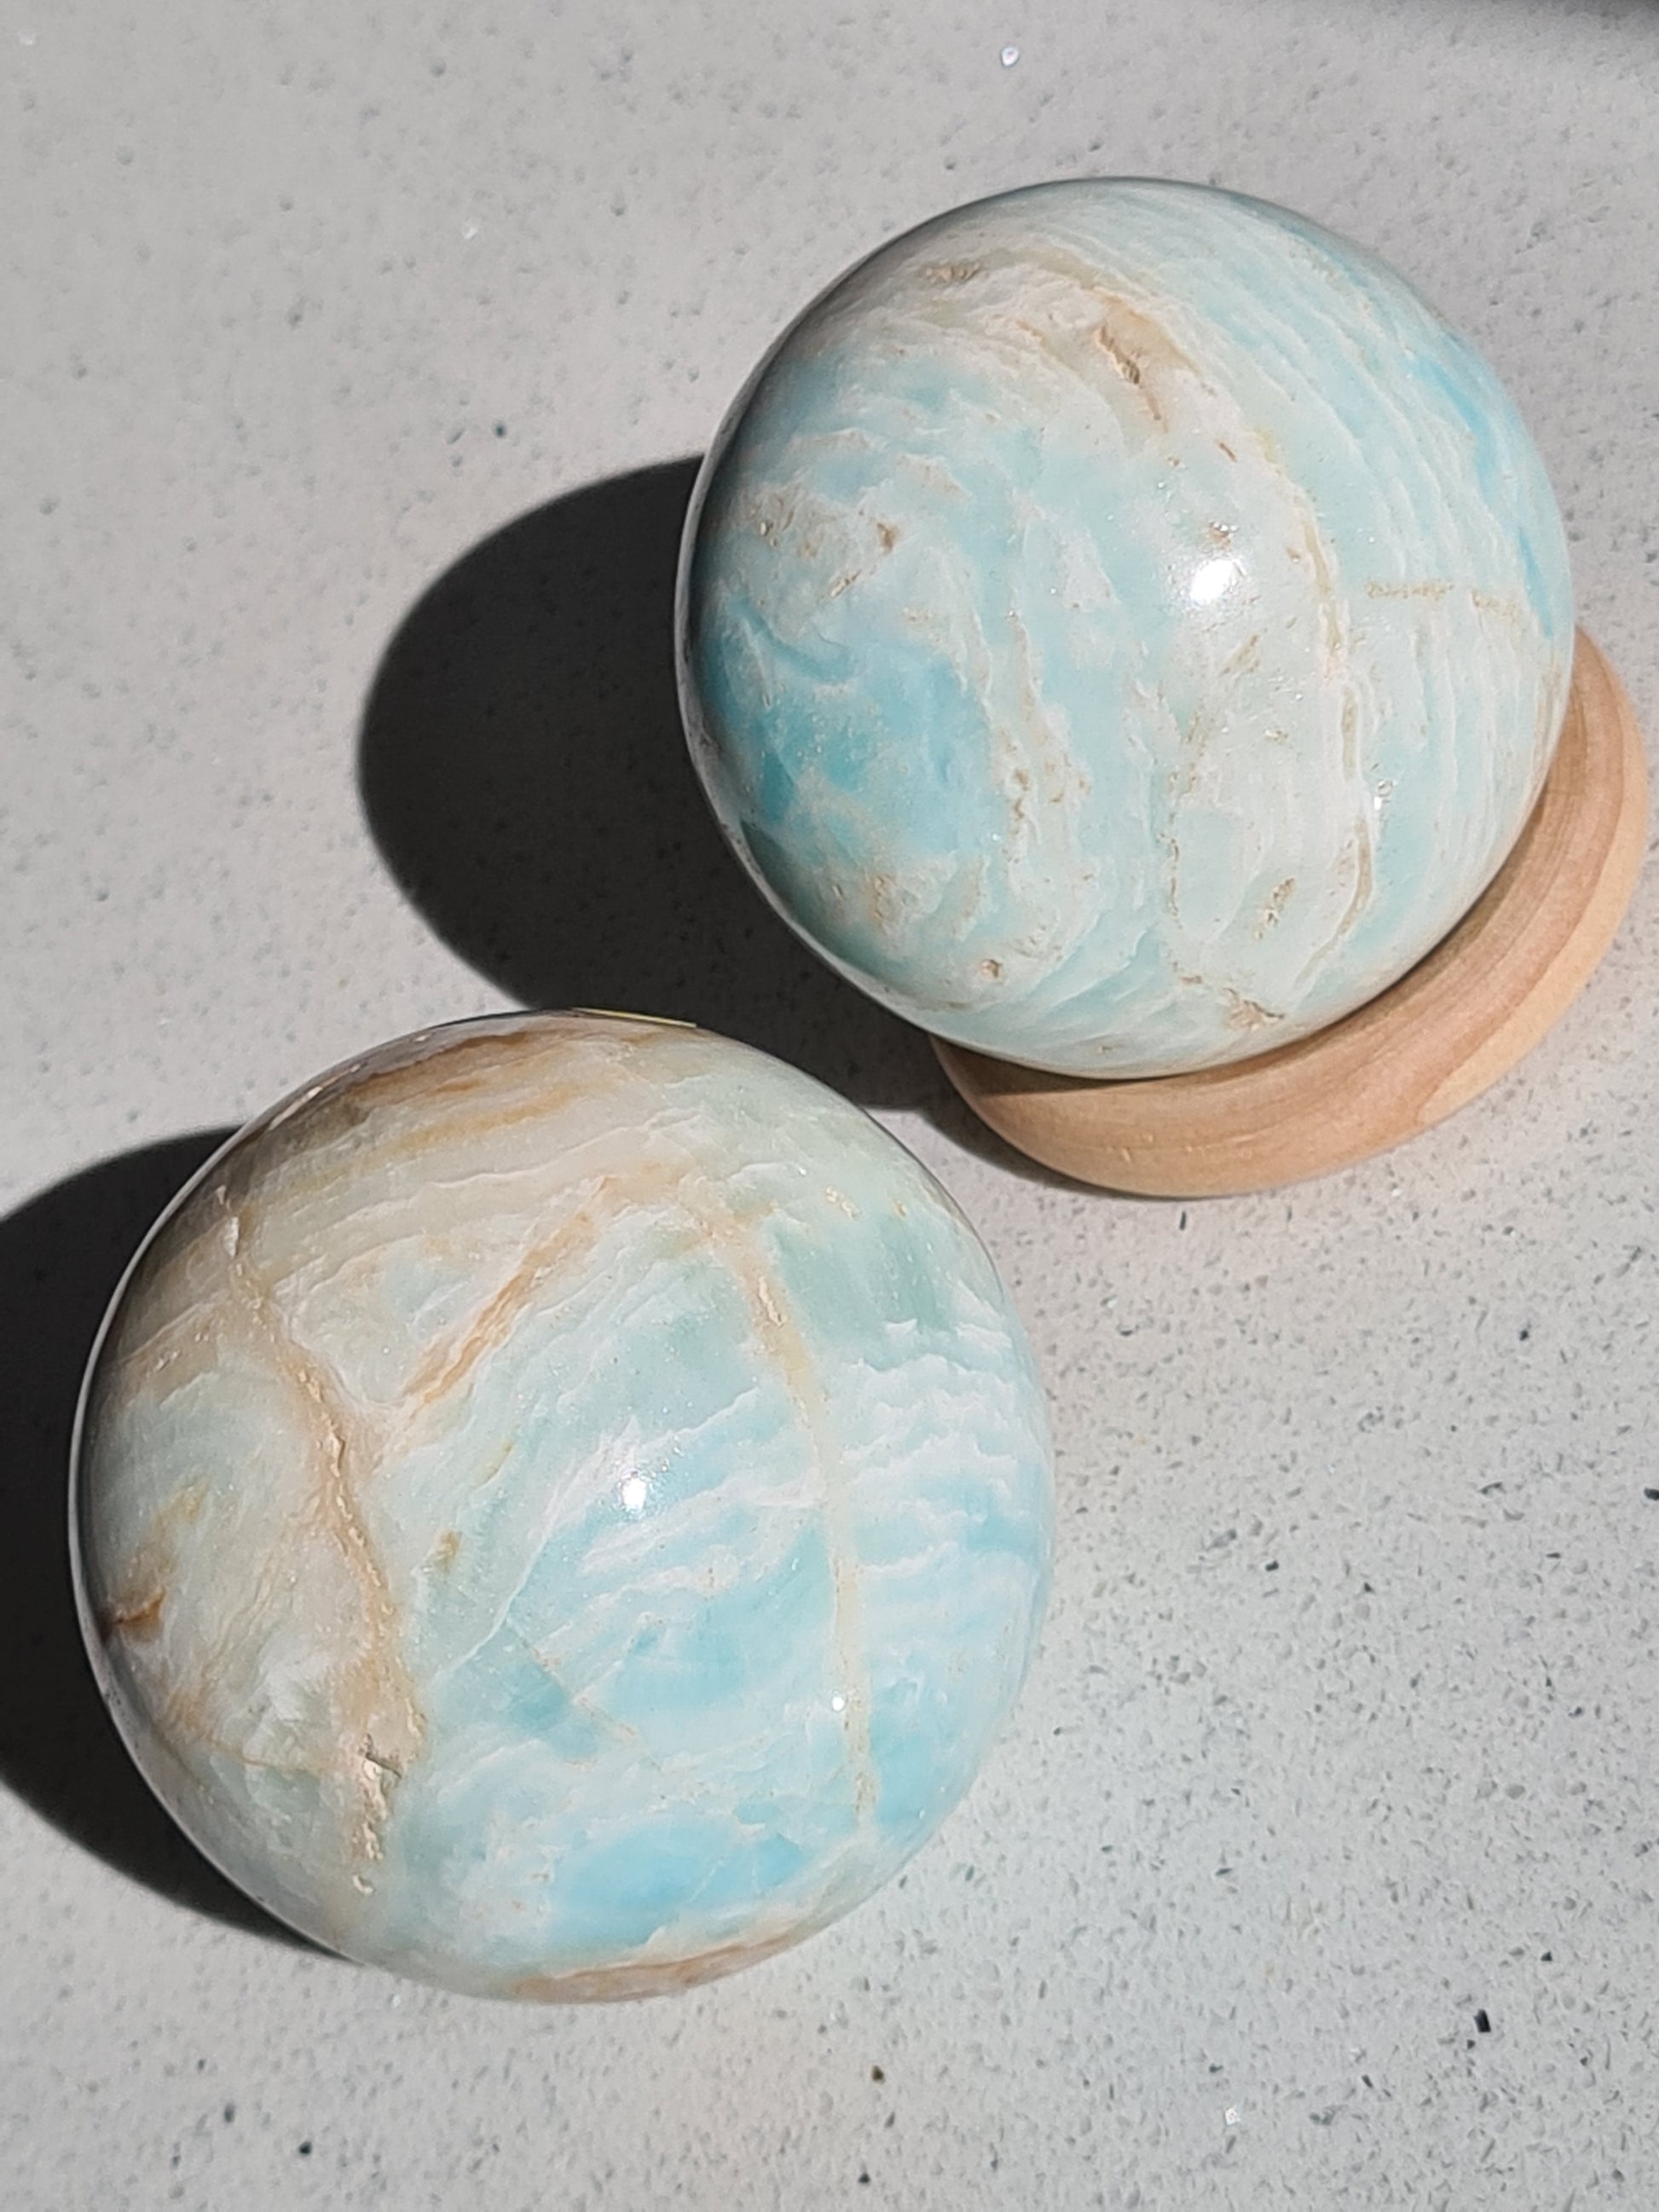 Caribbean Calcite Polished Sphere, with bands of blue calcite and brown/white aragonite.